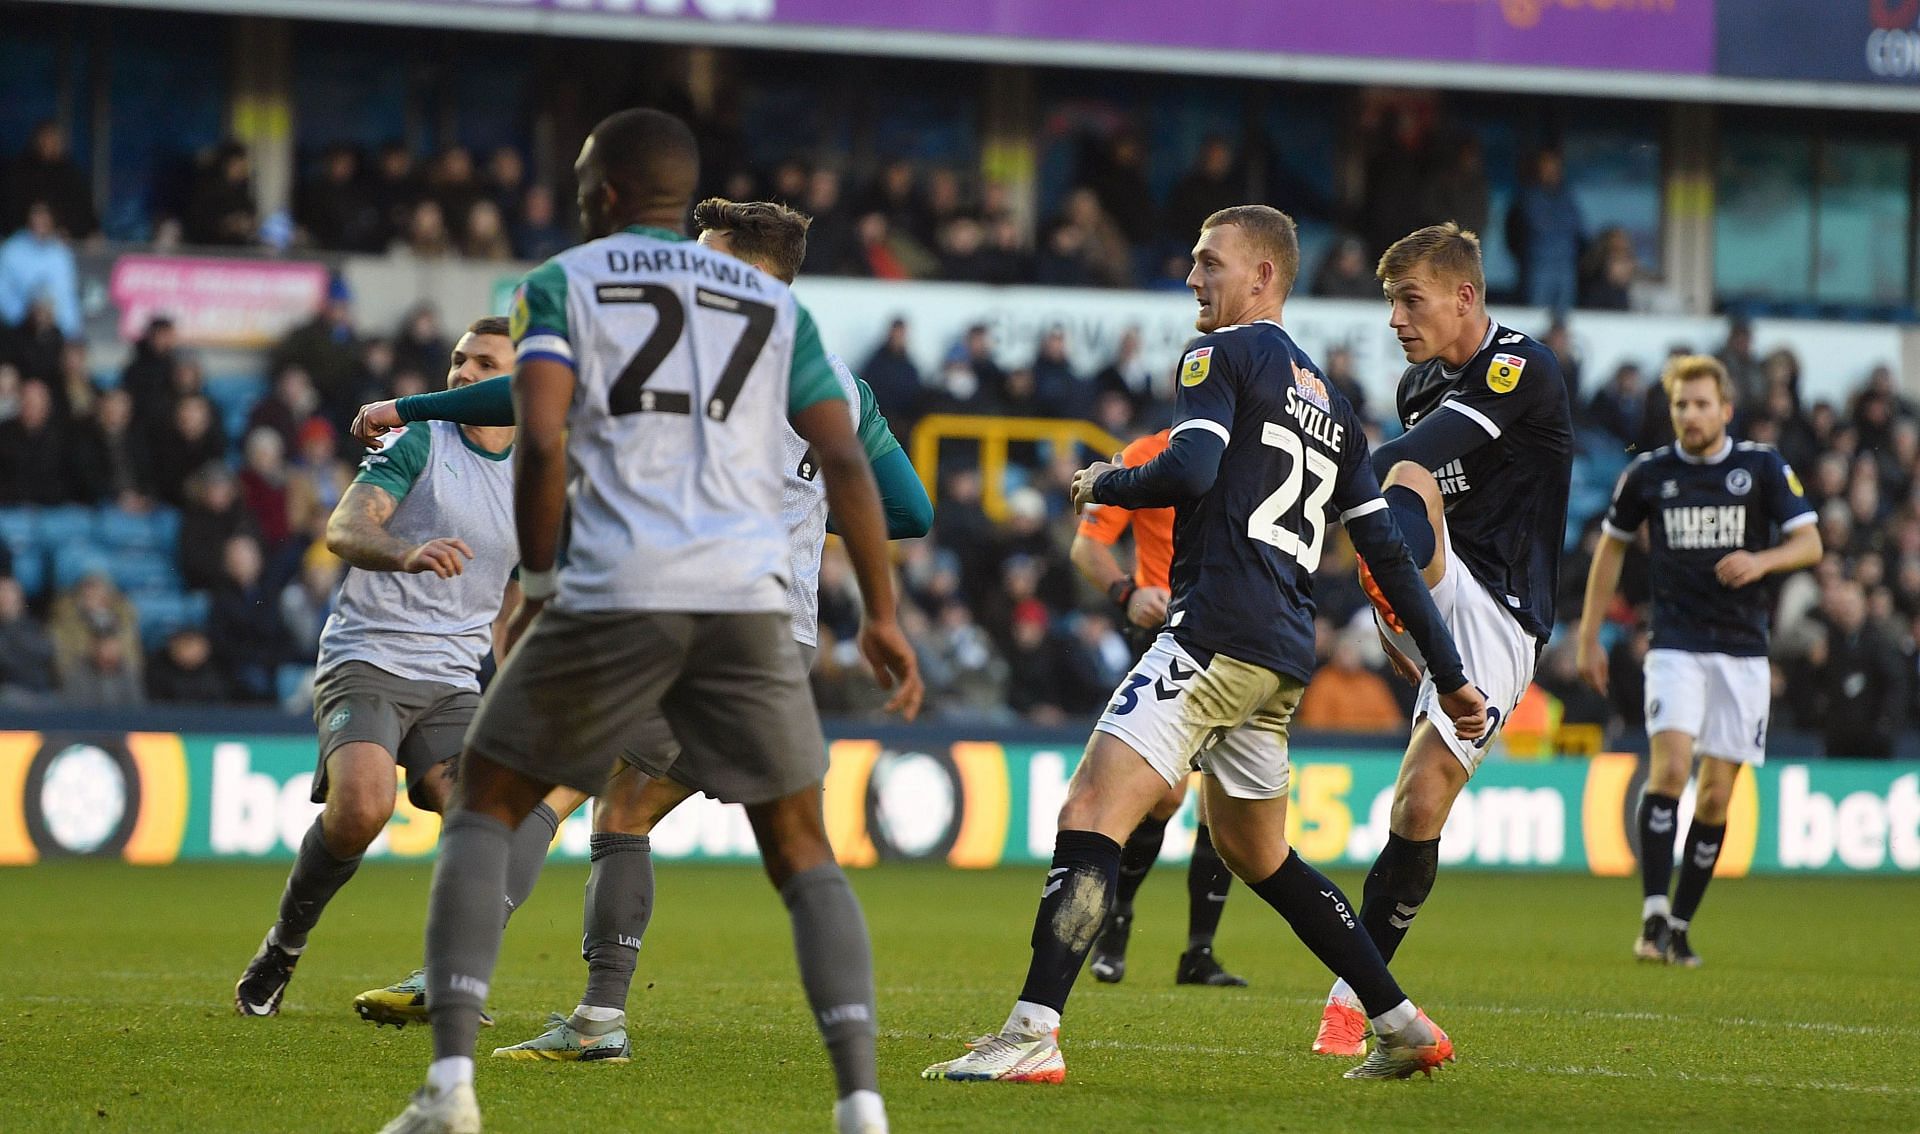 Wigan and Millwall drew their first league clash of the season